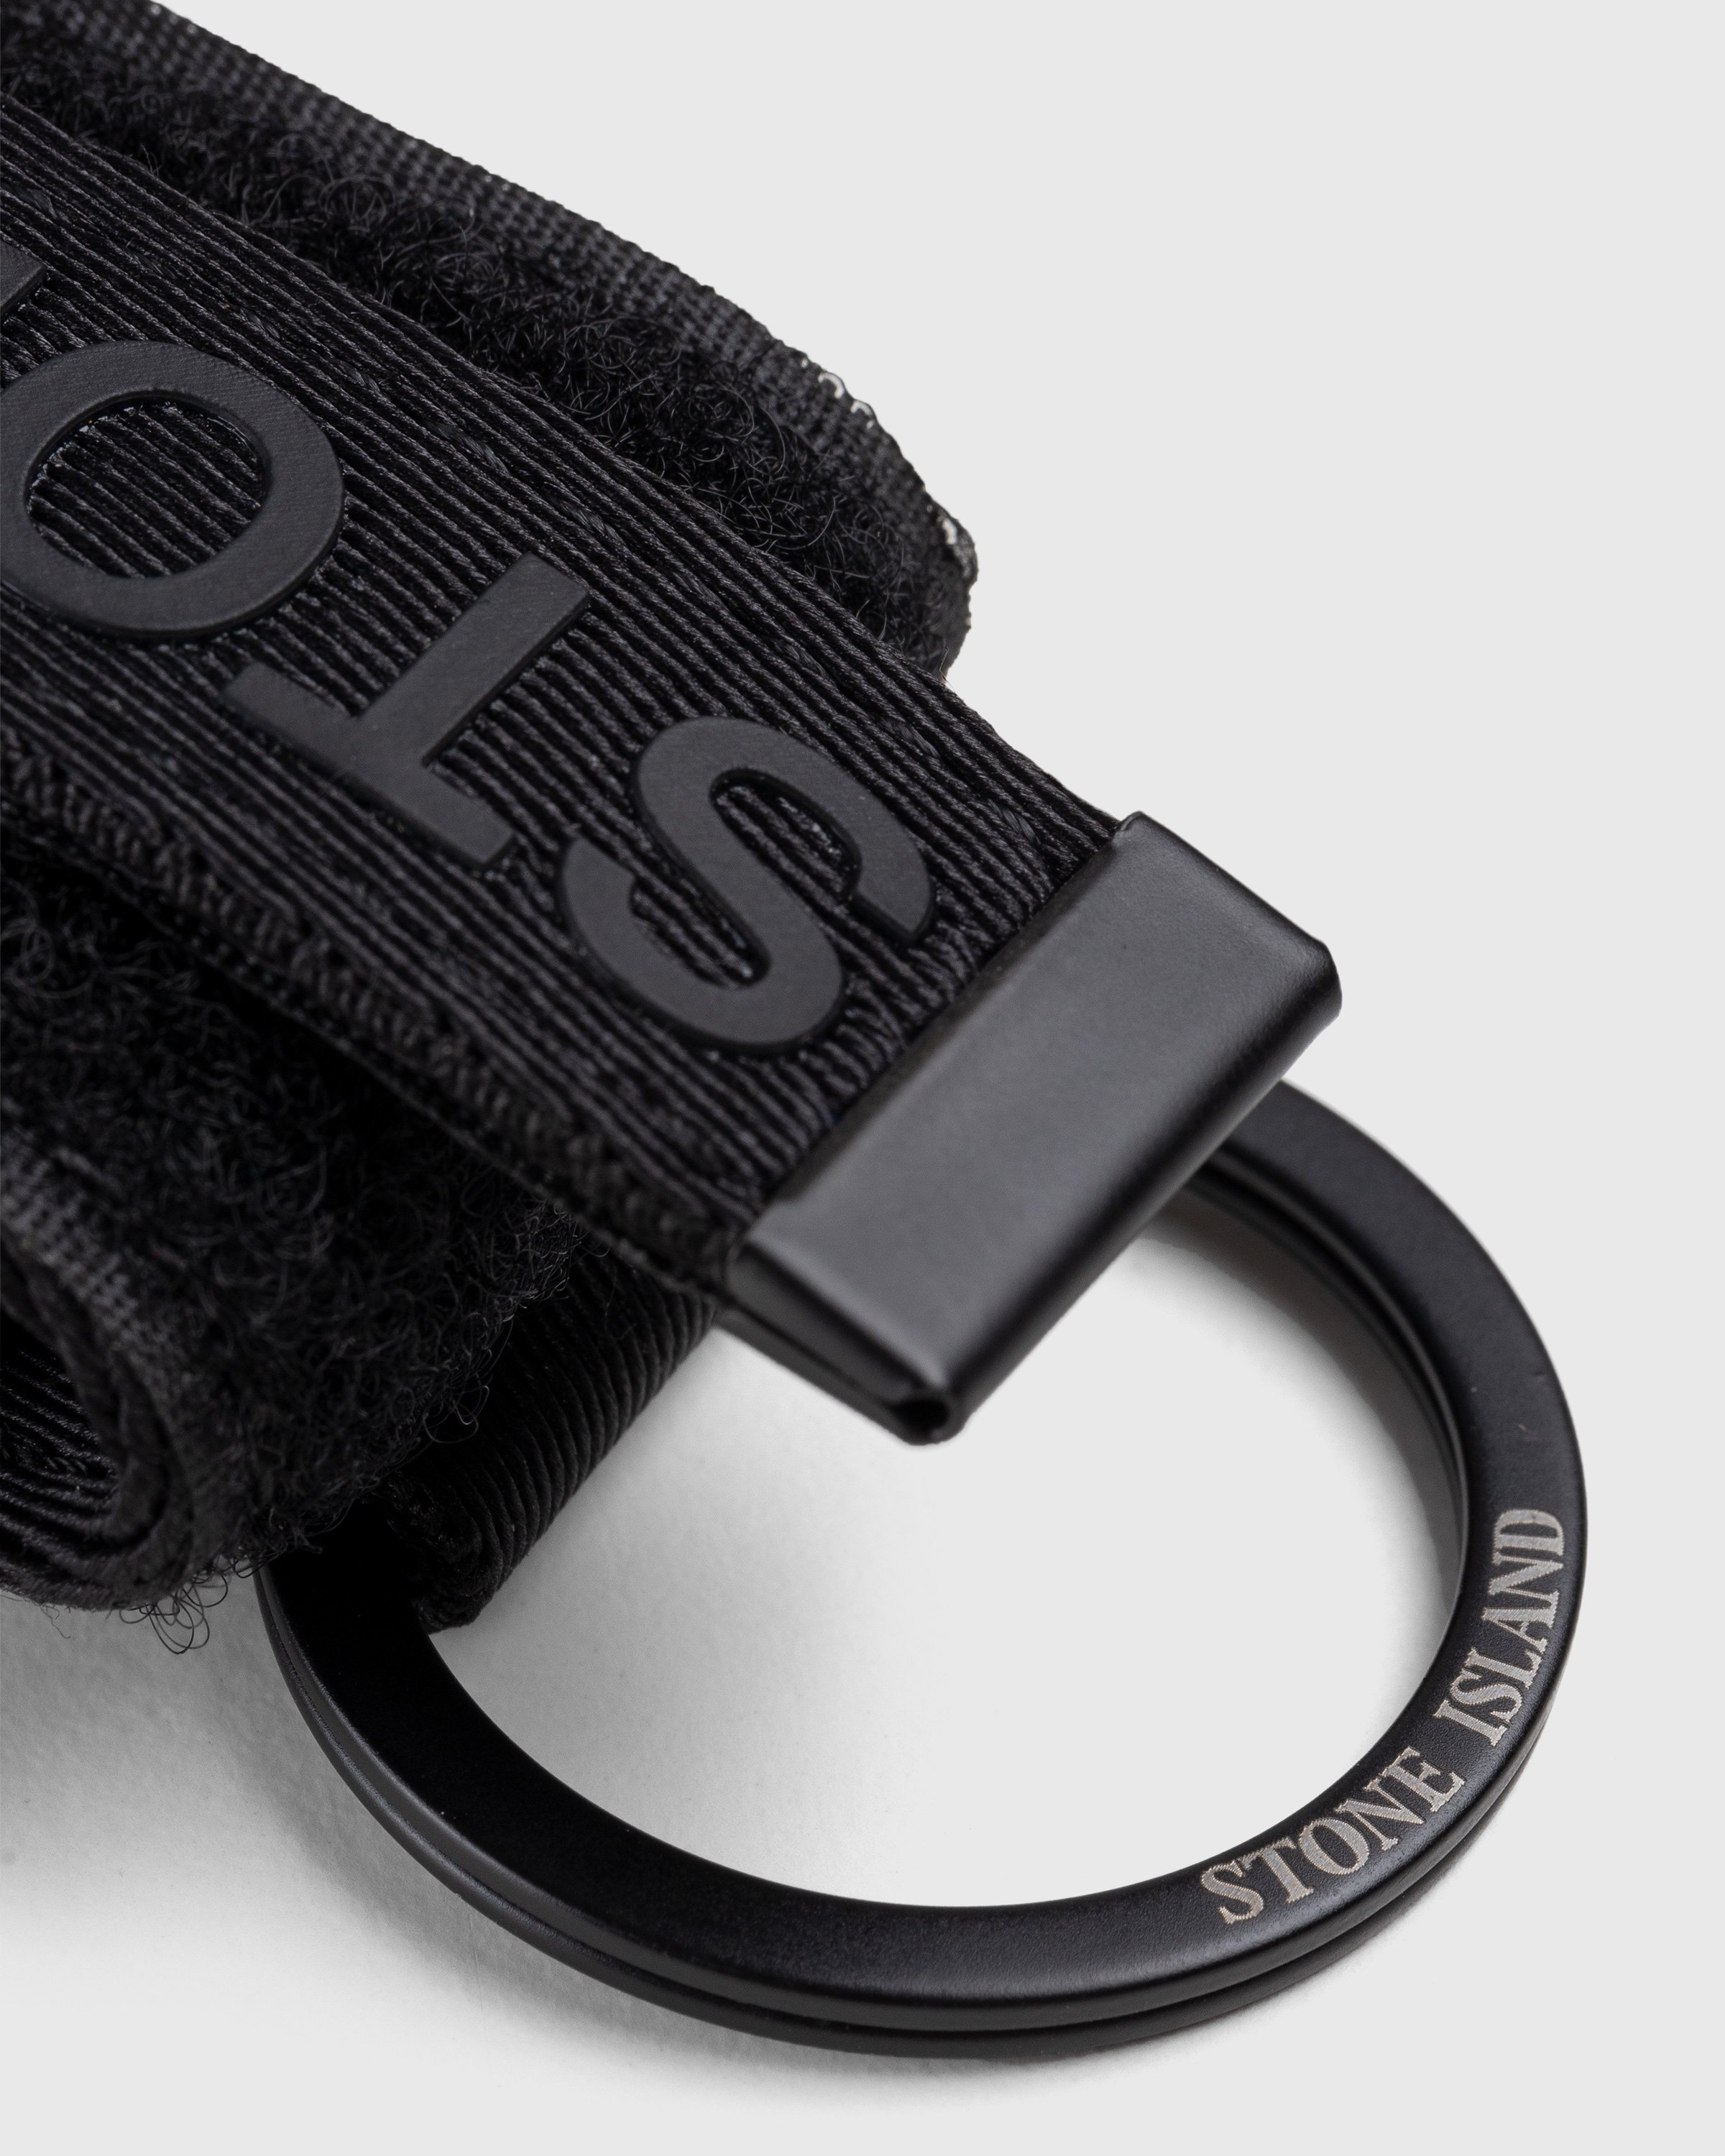 Stone Island - AirPods Case With Key Holder Black - Accessories - Black - Image 5